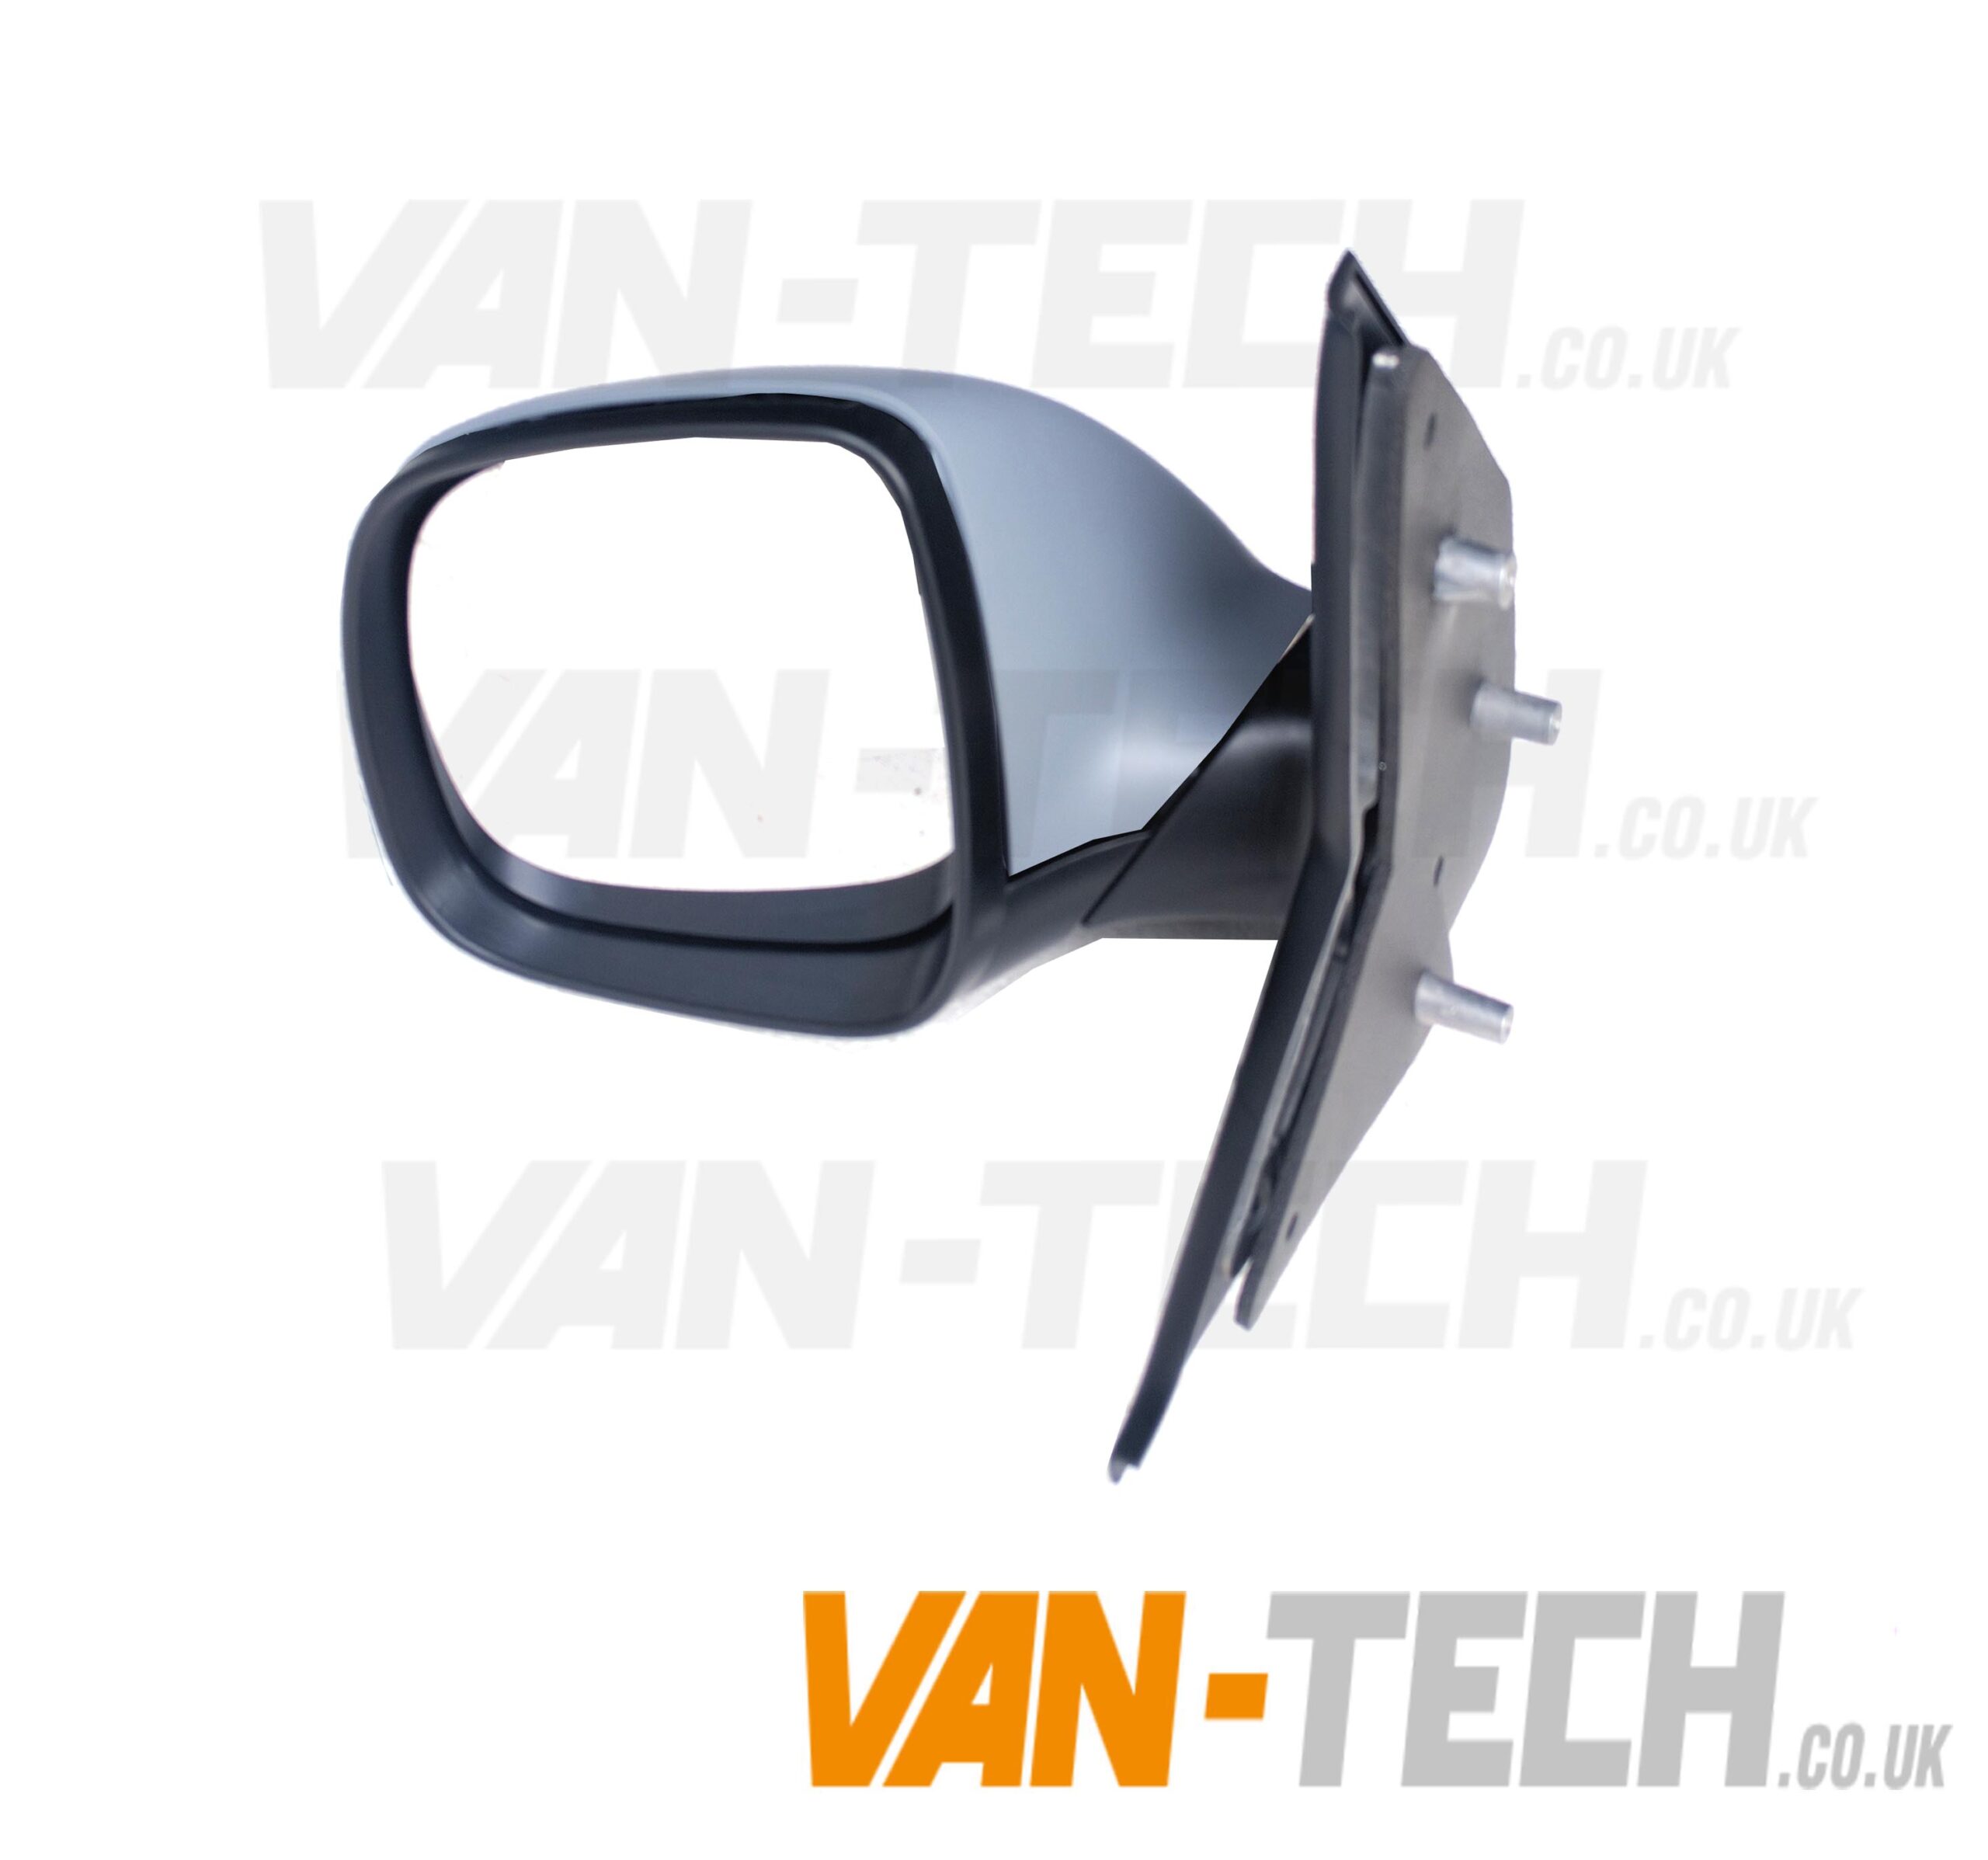 https://www.van-tech.co.uk/wp-content/uploads/2017/03/VW-Transporter-T5-2010-onwars-Wing-mirror-with-colour-code-panel-6-scaled.jpg